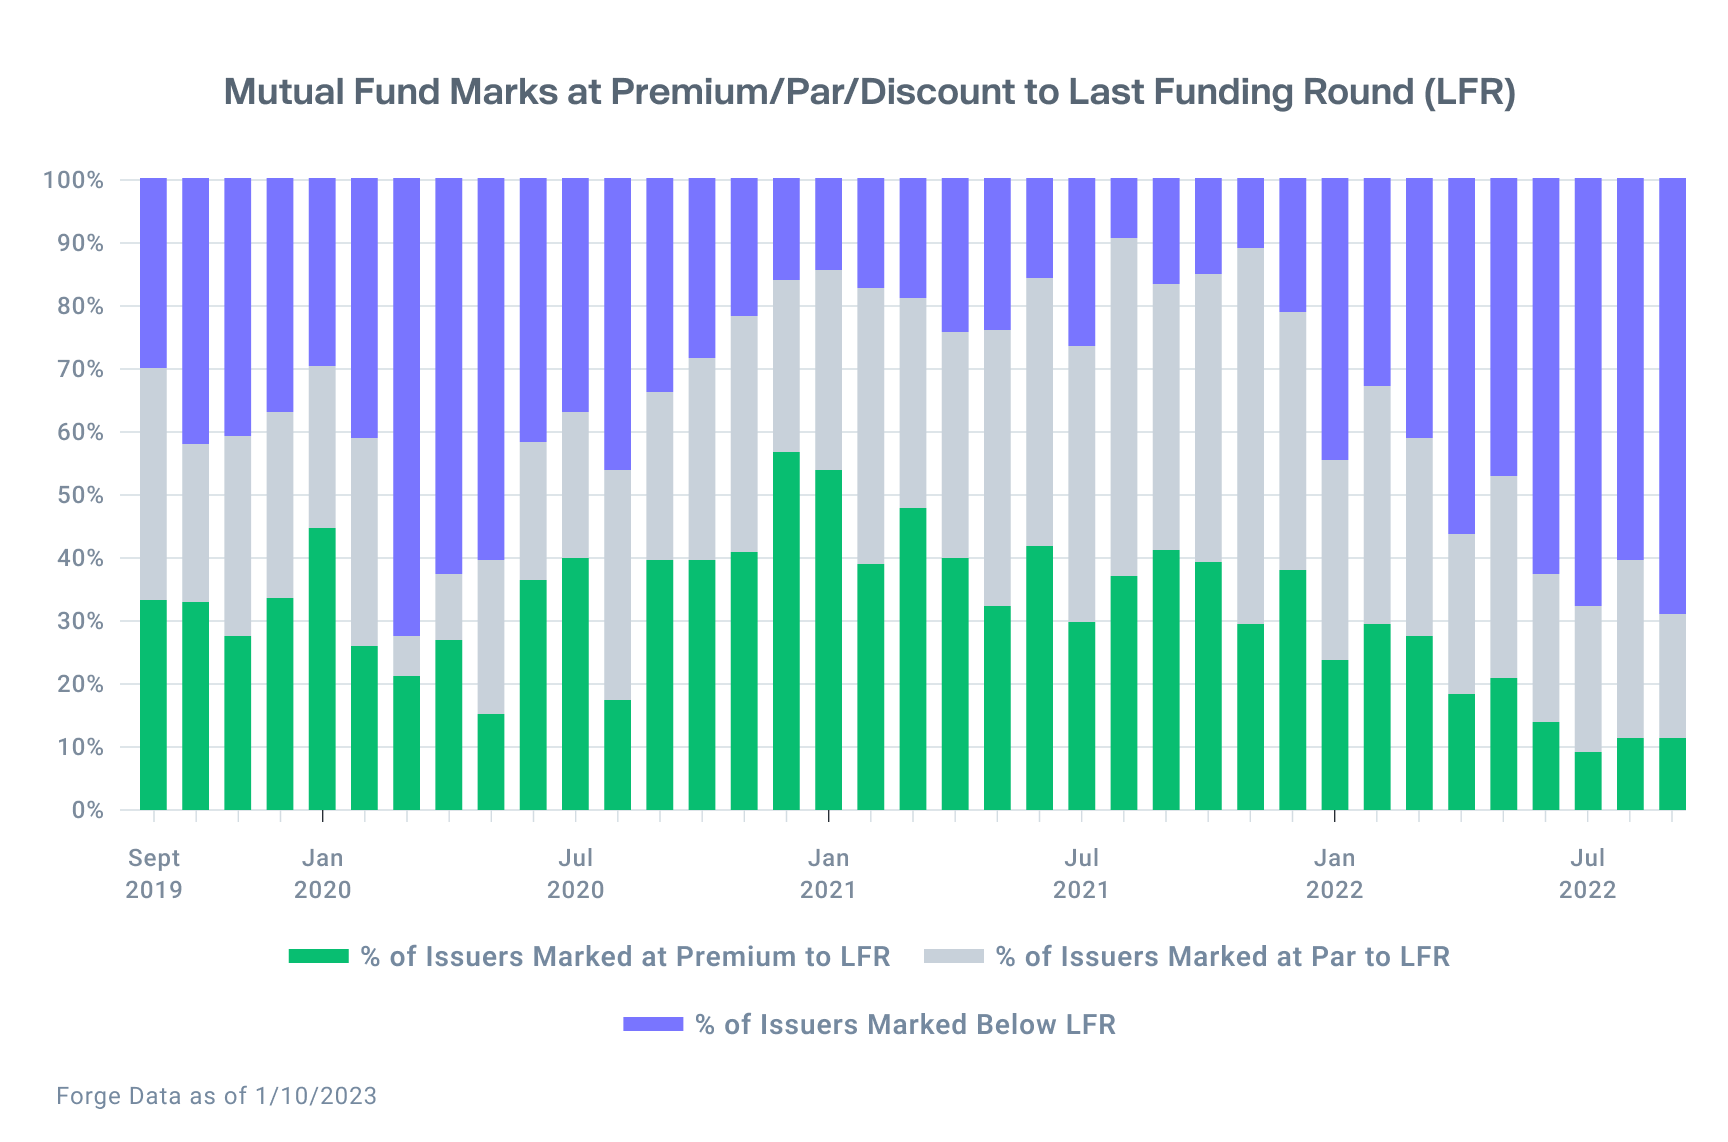 Graph shows distribution of Mutual Fund Marks at Premium, Par and Discount to last funding round